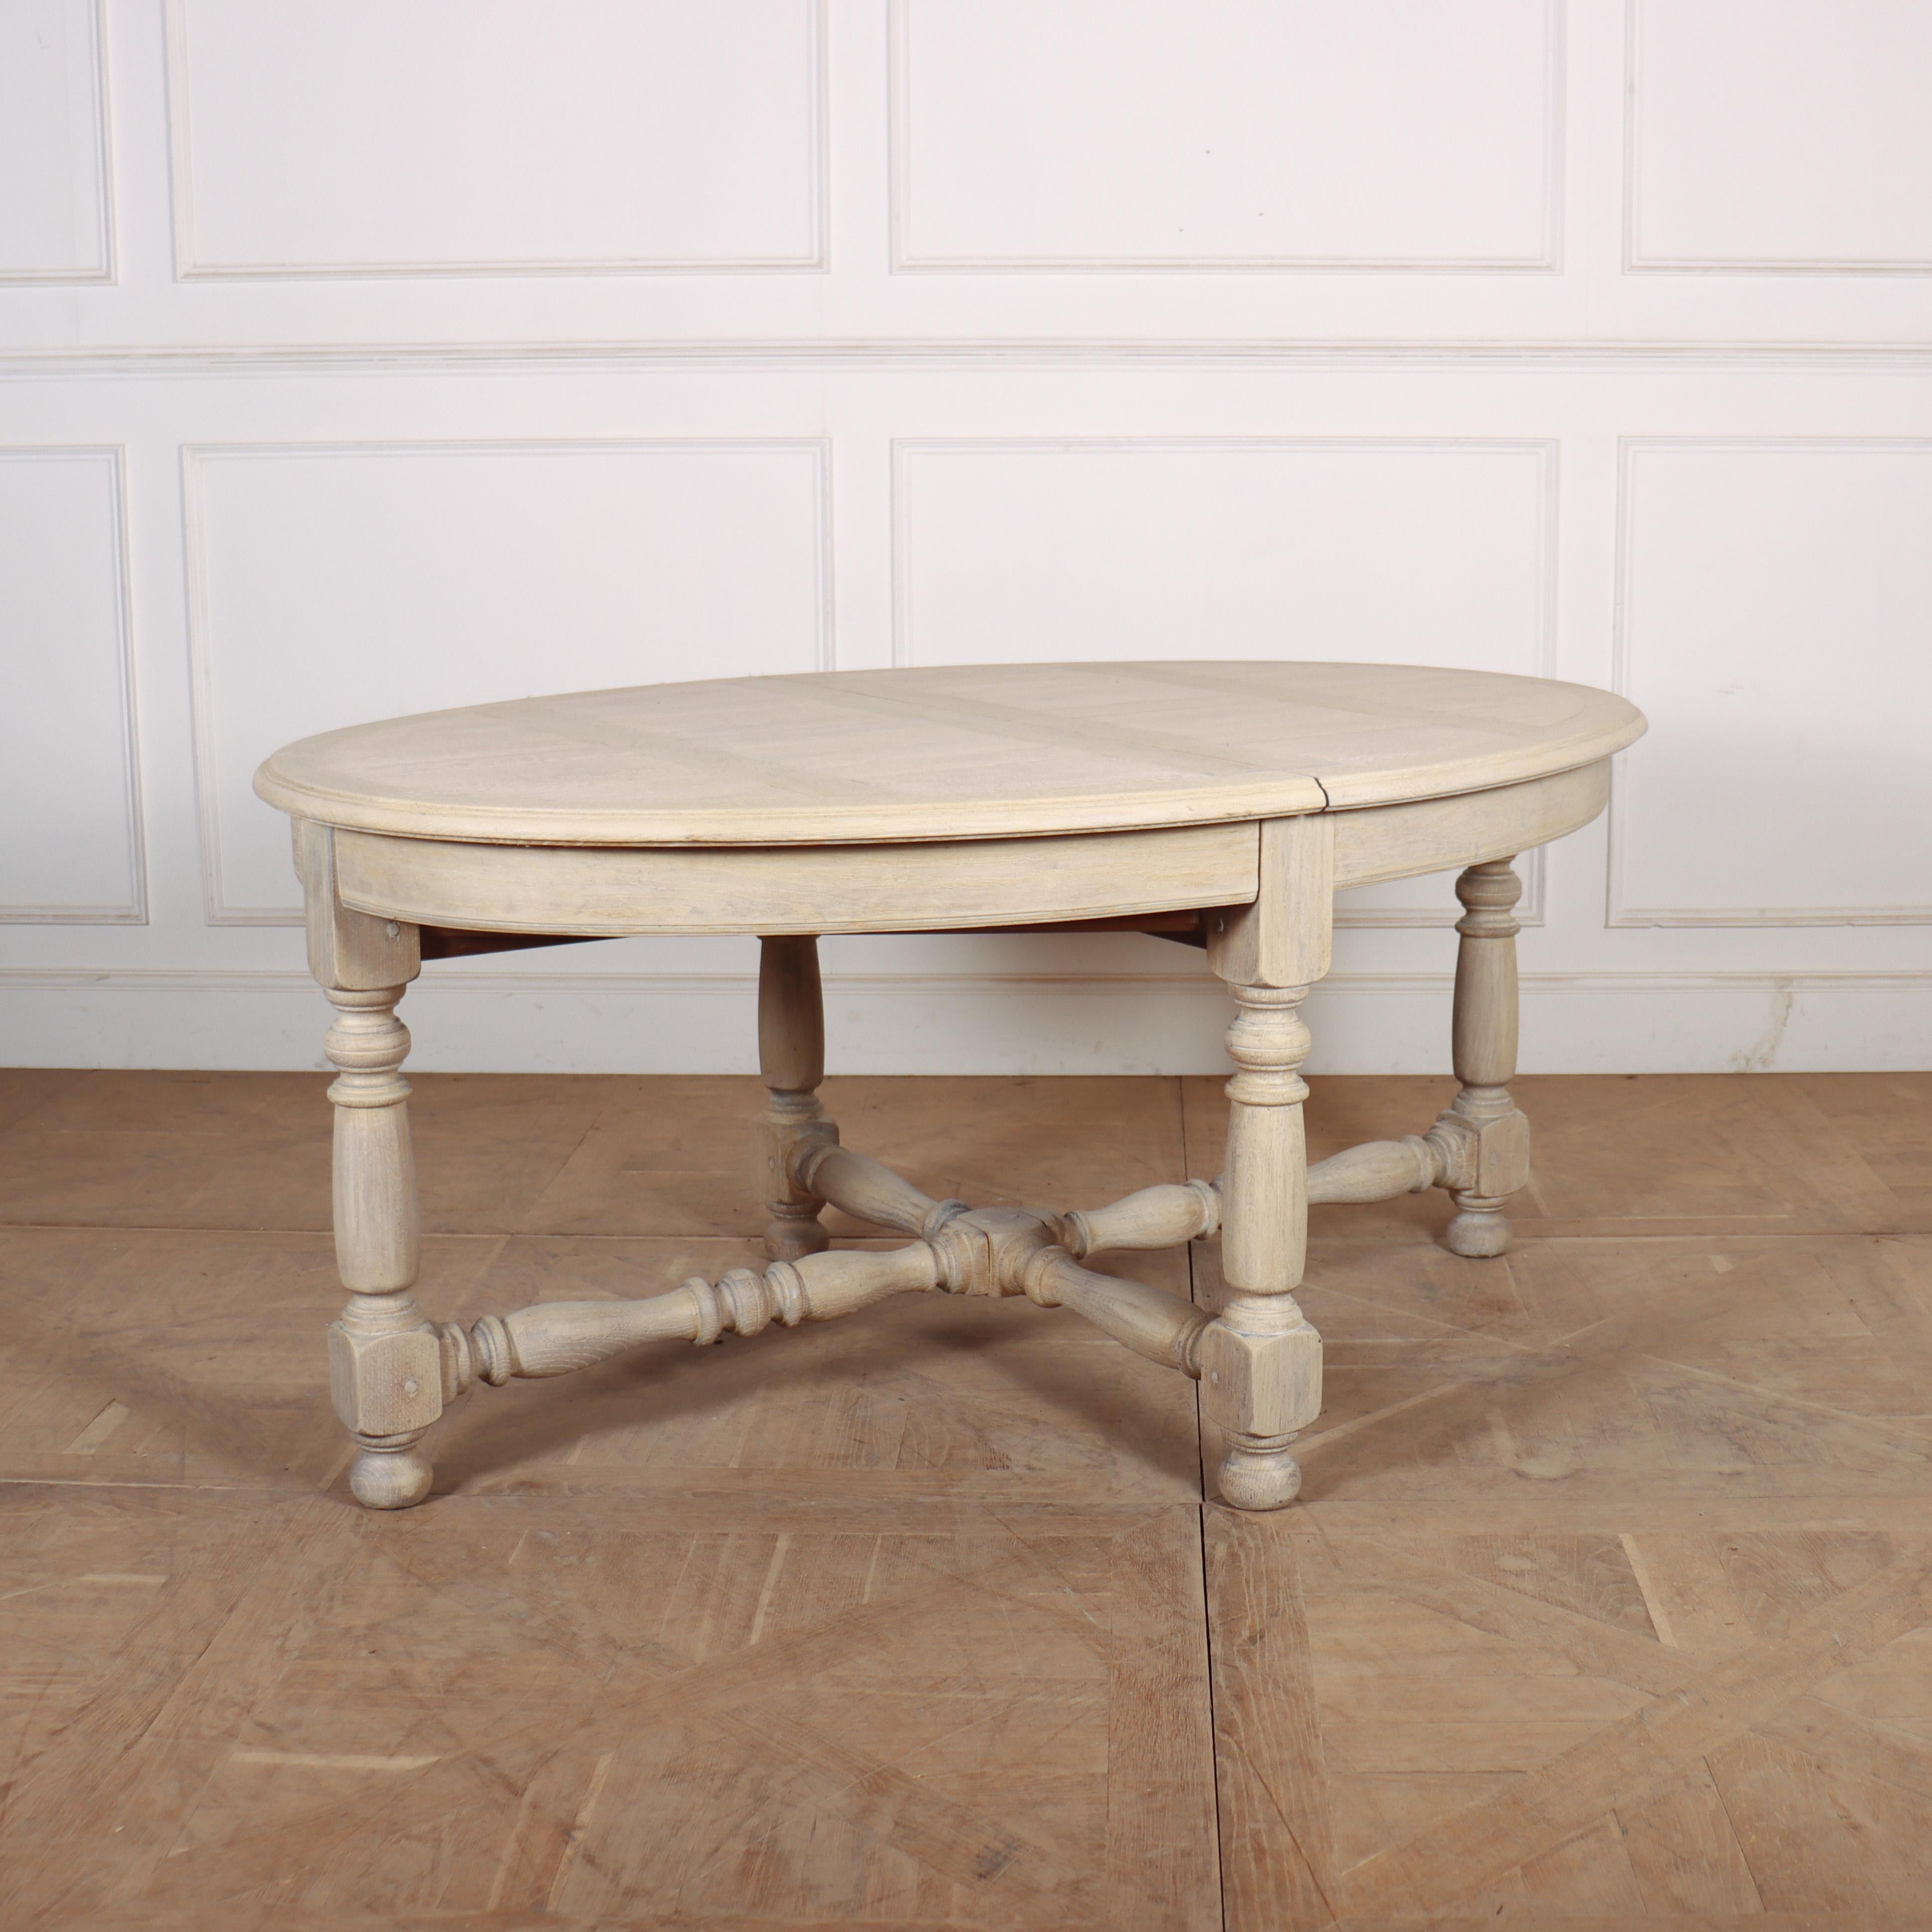 Unusual 19th century bleached oak French oval dining table with 4 individual leaves measuring 15